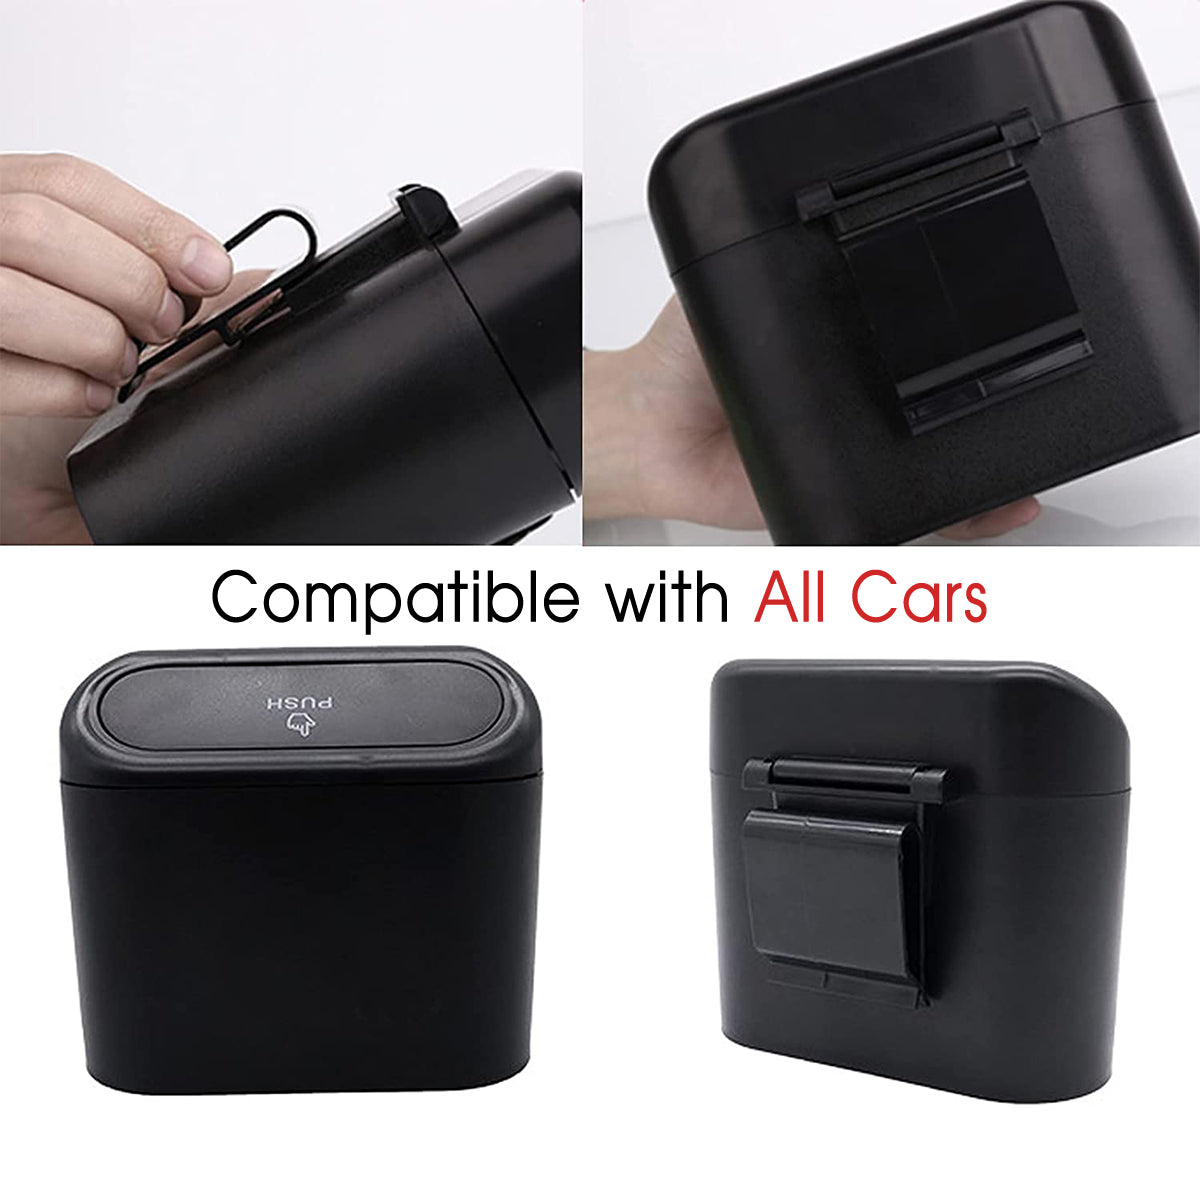 Car Trash Can, Custom For Your Cars, Mini Car Accessories with Lid and Trash Bag, Cute Car Organizer Bin, Small Garbage Can for Storage and Organization, Car Accessories MS11996